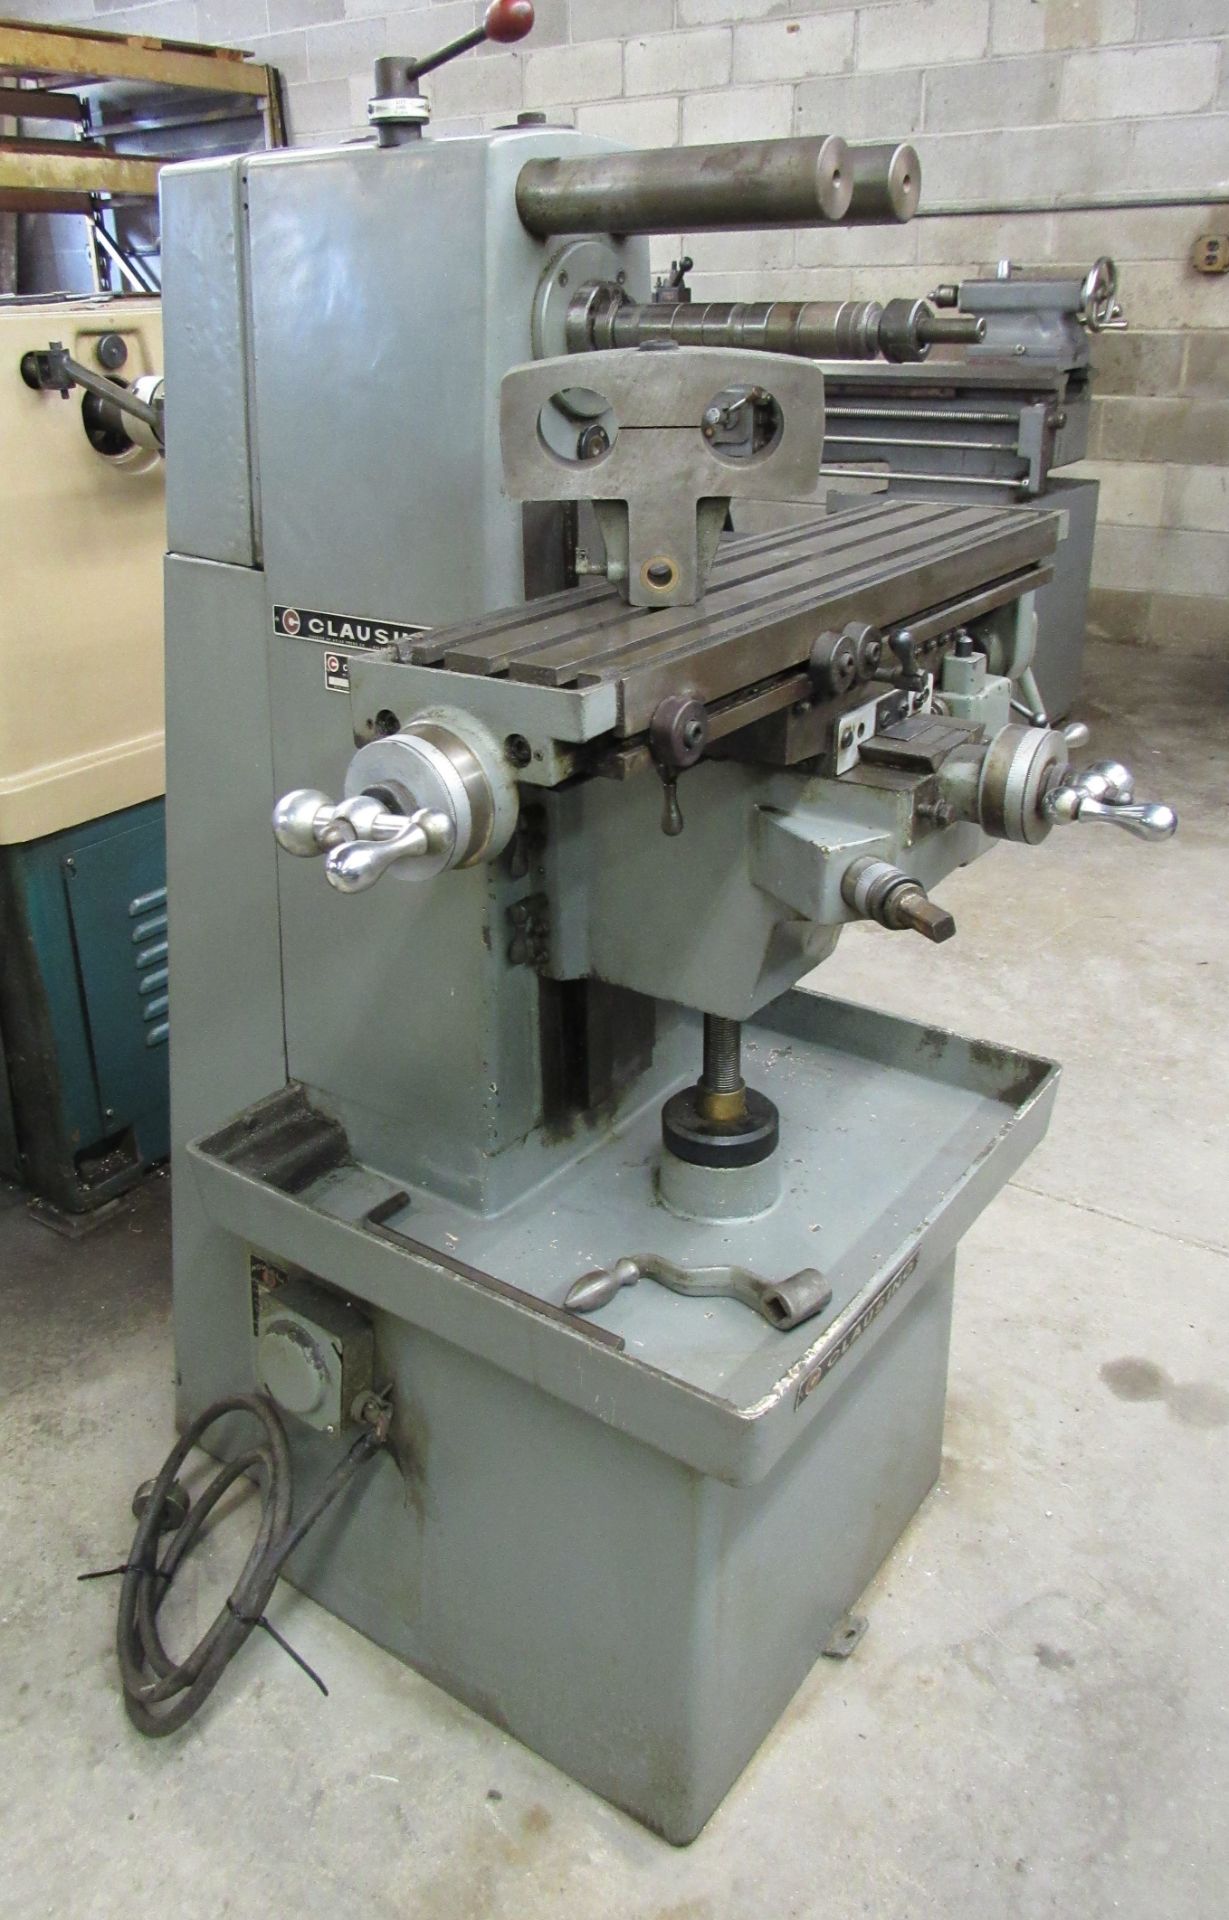 Clausing Mod.8540 Horizontal Power-Feed Milling Machine - S/N 800949 - Image 3 of 3